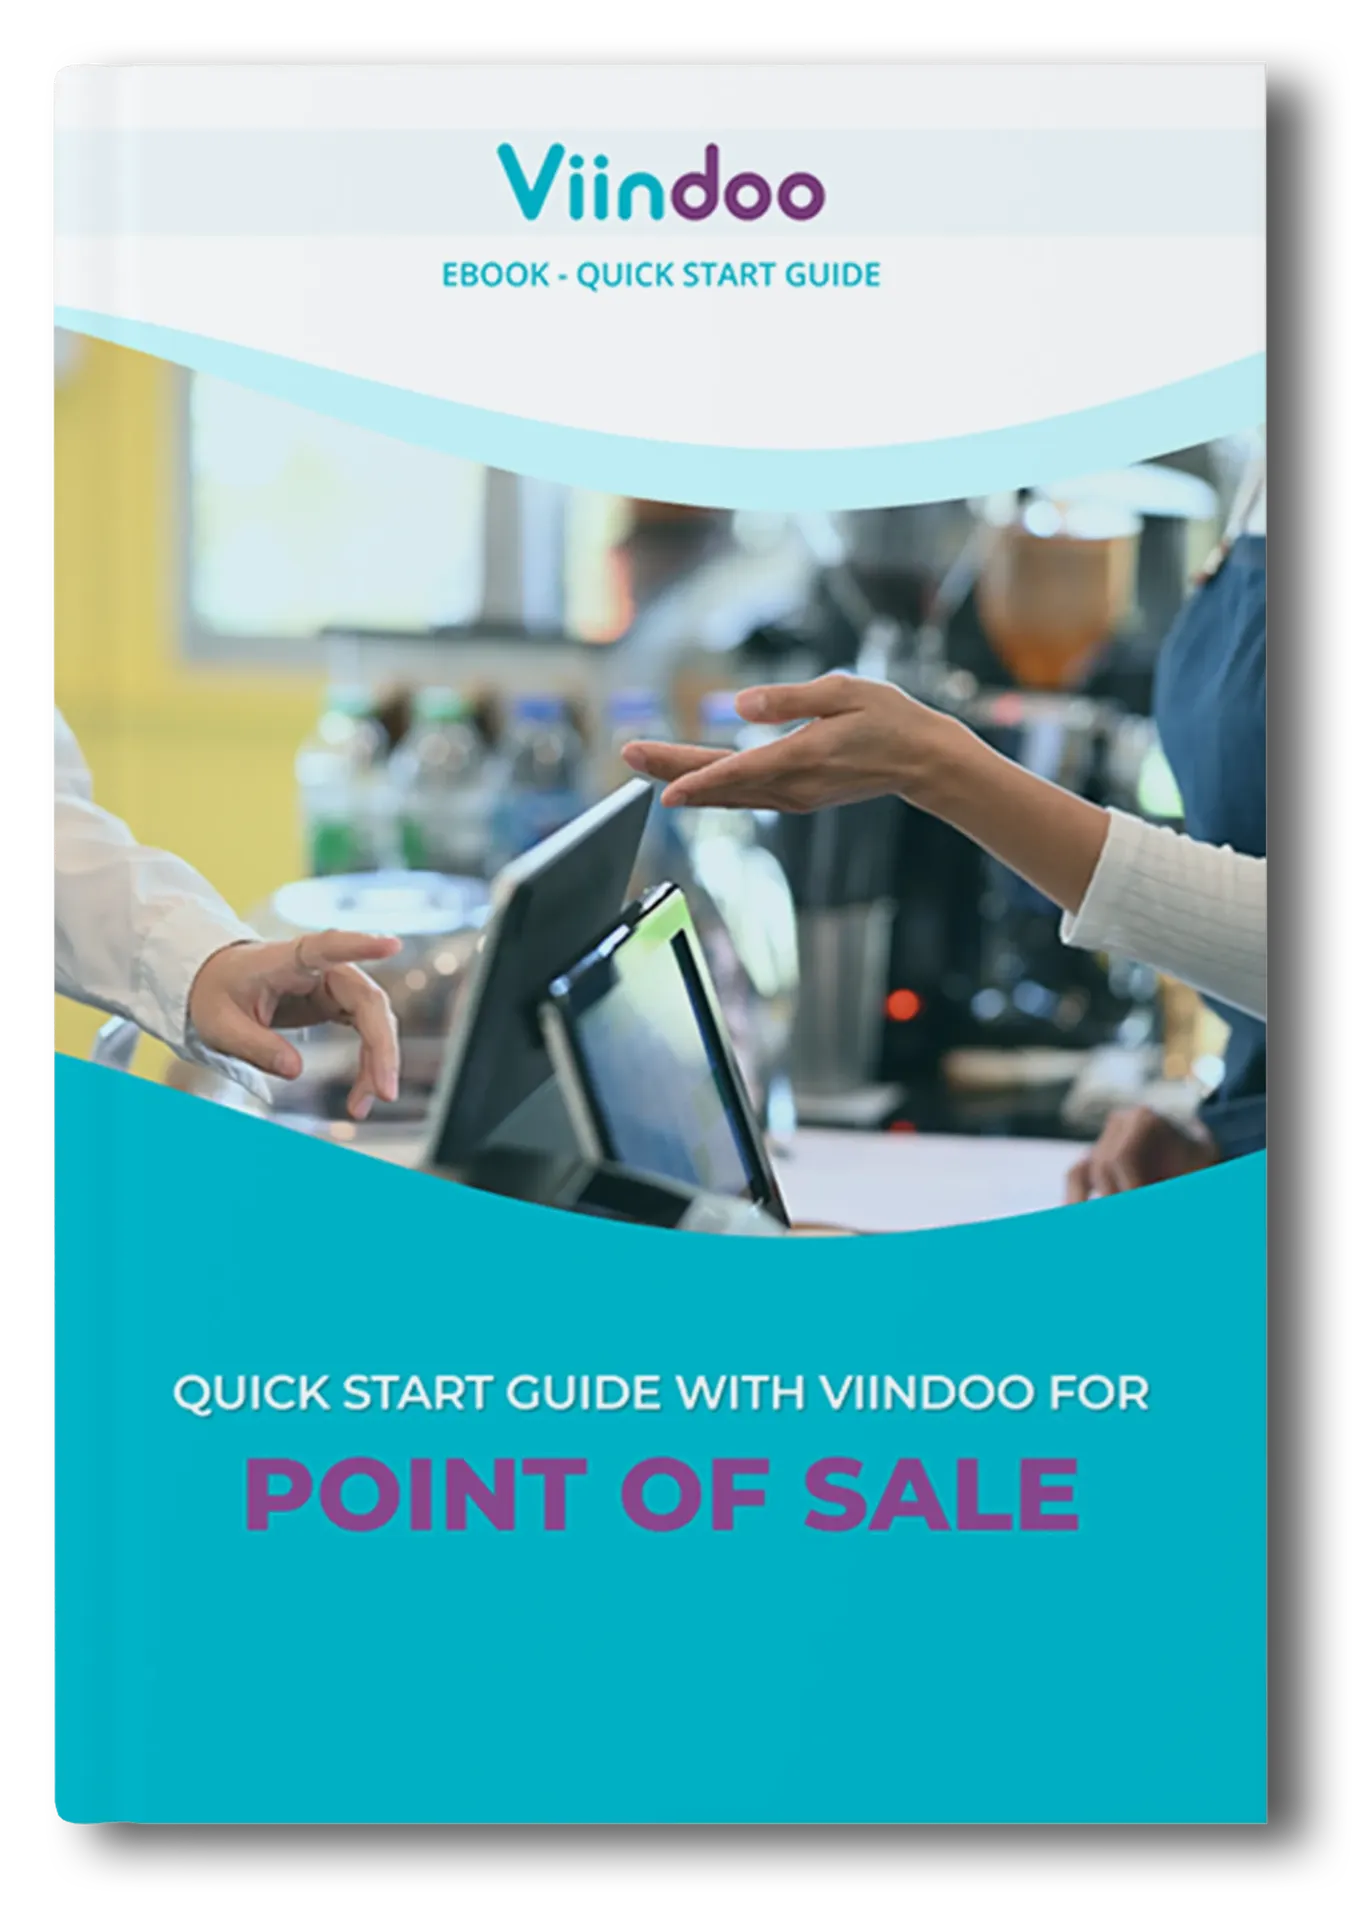 Quick Start Guide with Viindoo for Point of Sale